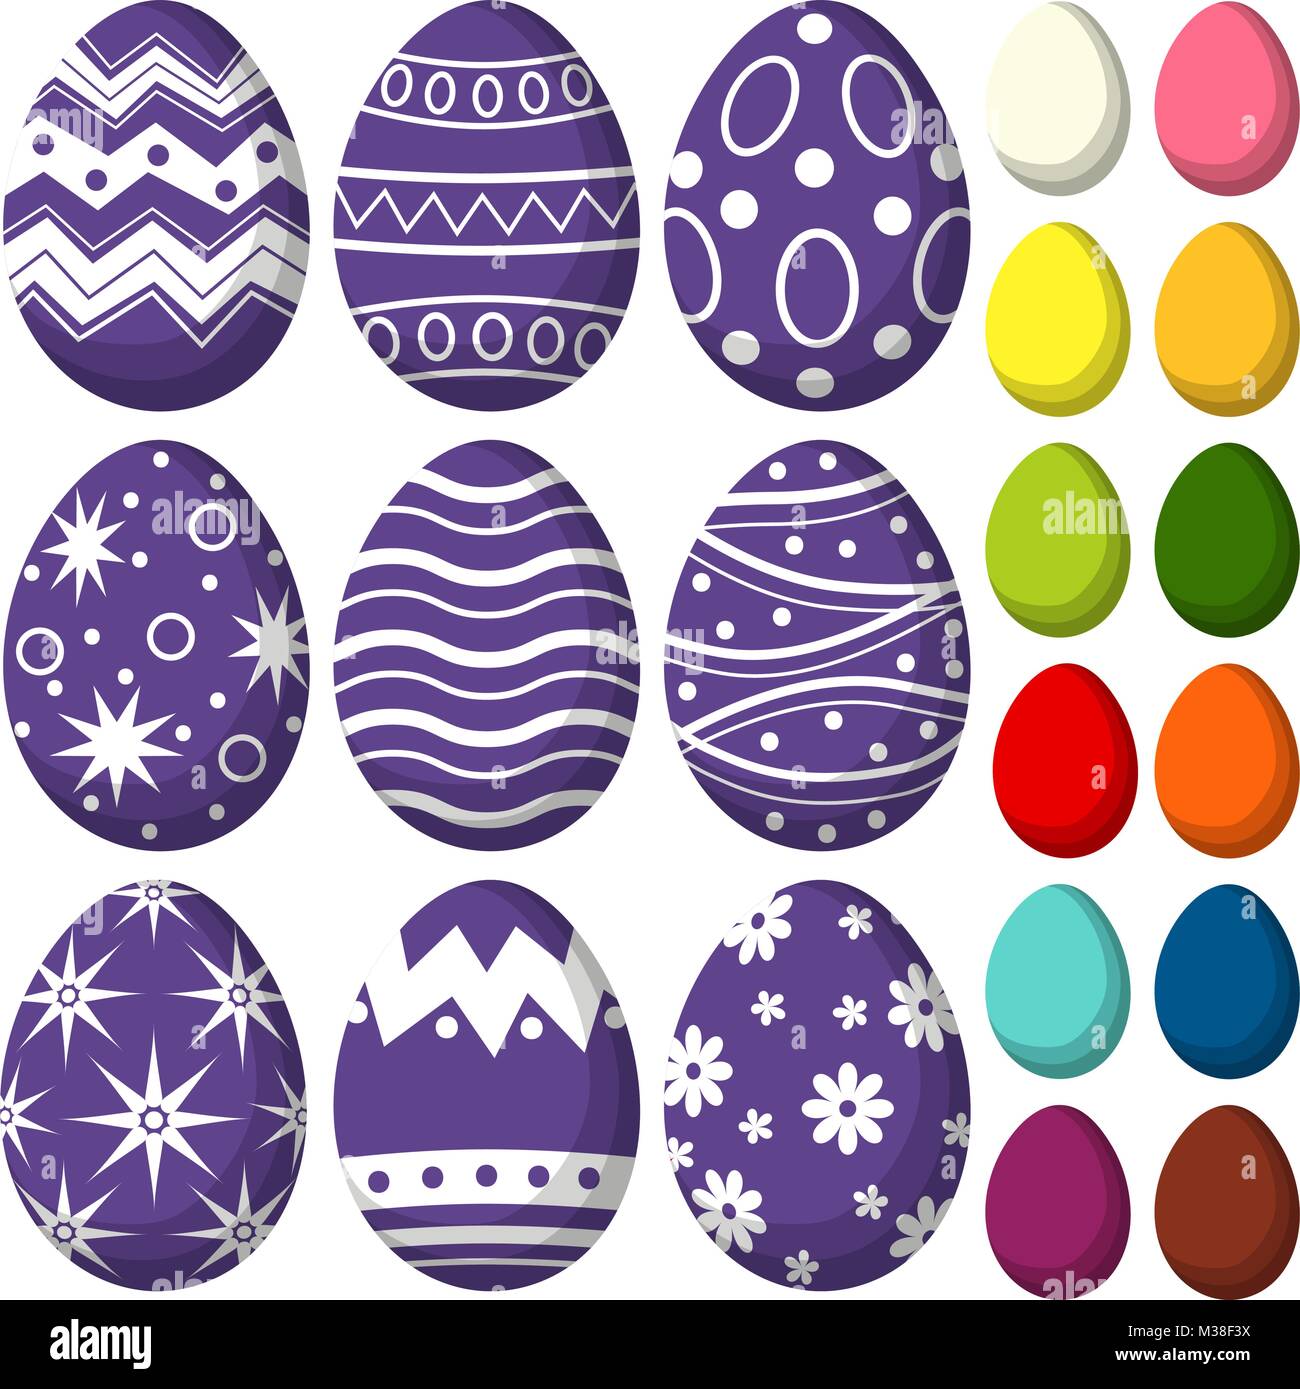 Colorful purple ultra violet easter chocolate pattern cover egg set poster. Stock Vector